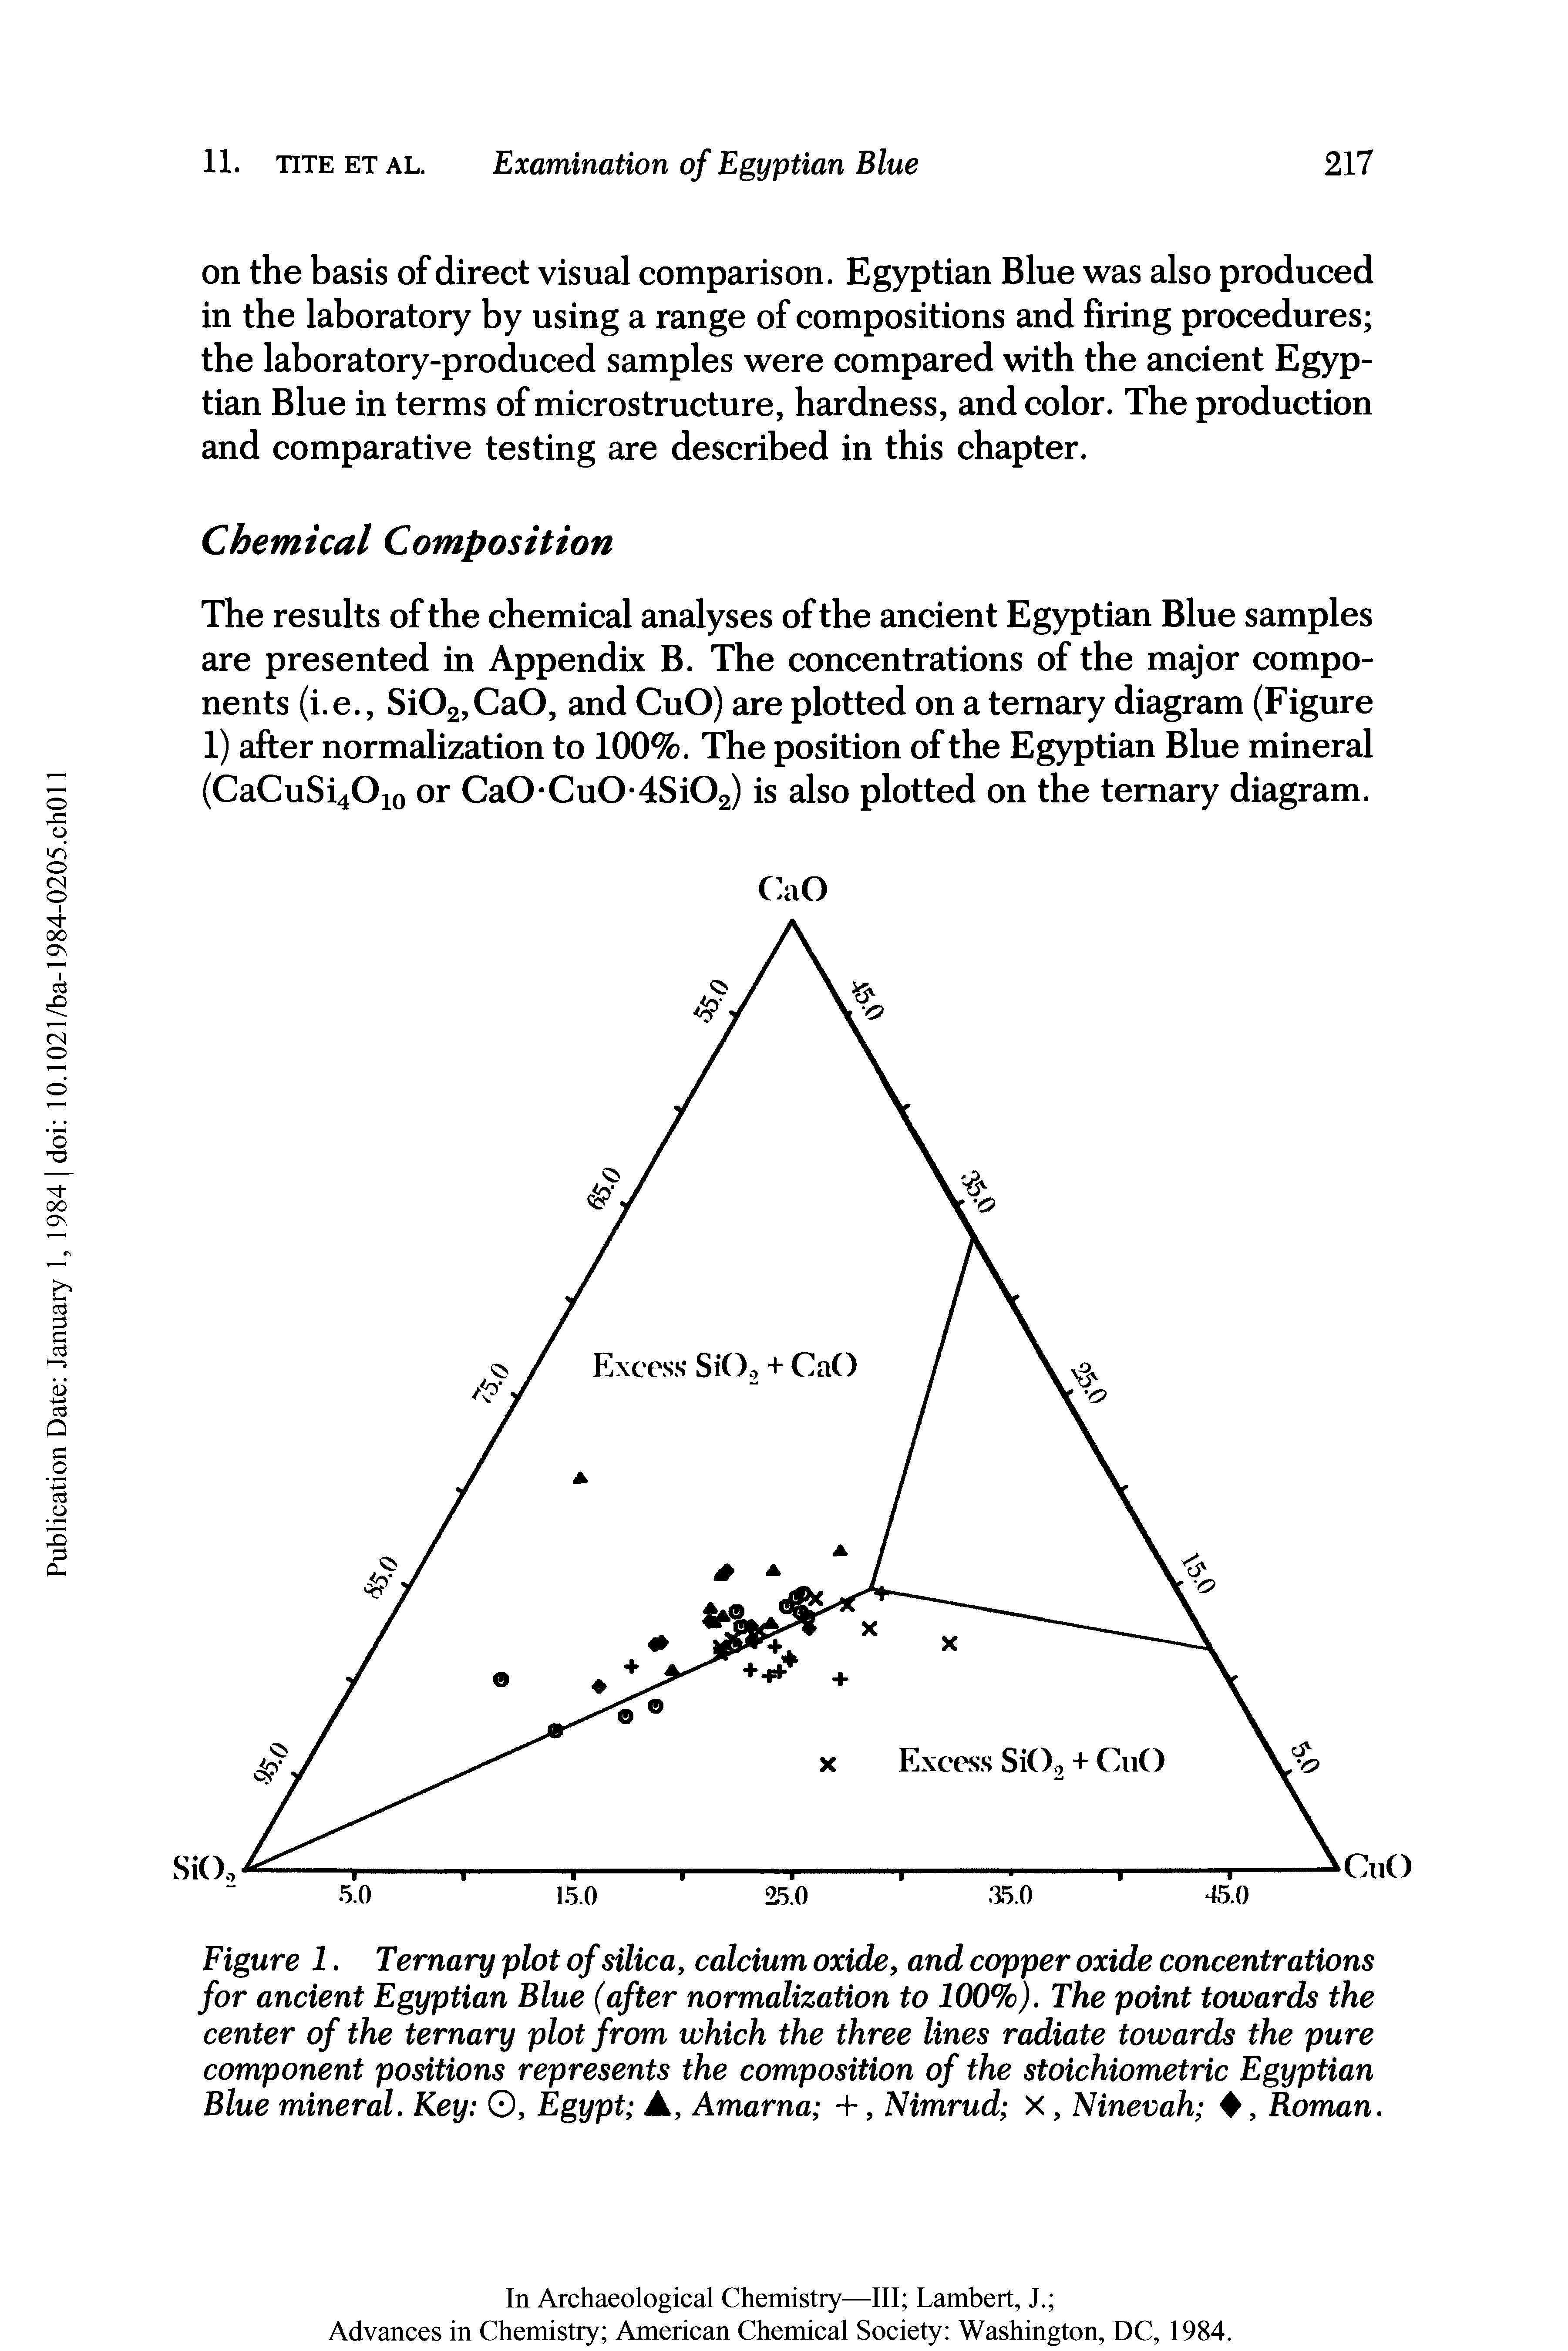 Figure 1. Ternary plot of silica calcium oxide, and copper oxide concentrations for ancient Egyptian Blue (after normalization to 100%). The point towards the center of the ternary plot from which the three lines radiate towards the pure component positions represents the composition of the stoichiometric Egyptian Blue mineral. Key O, Egypt A, Amarna +, Nimrud X, Ninevah , Roman.